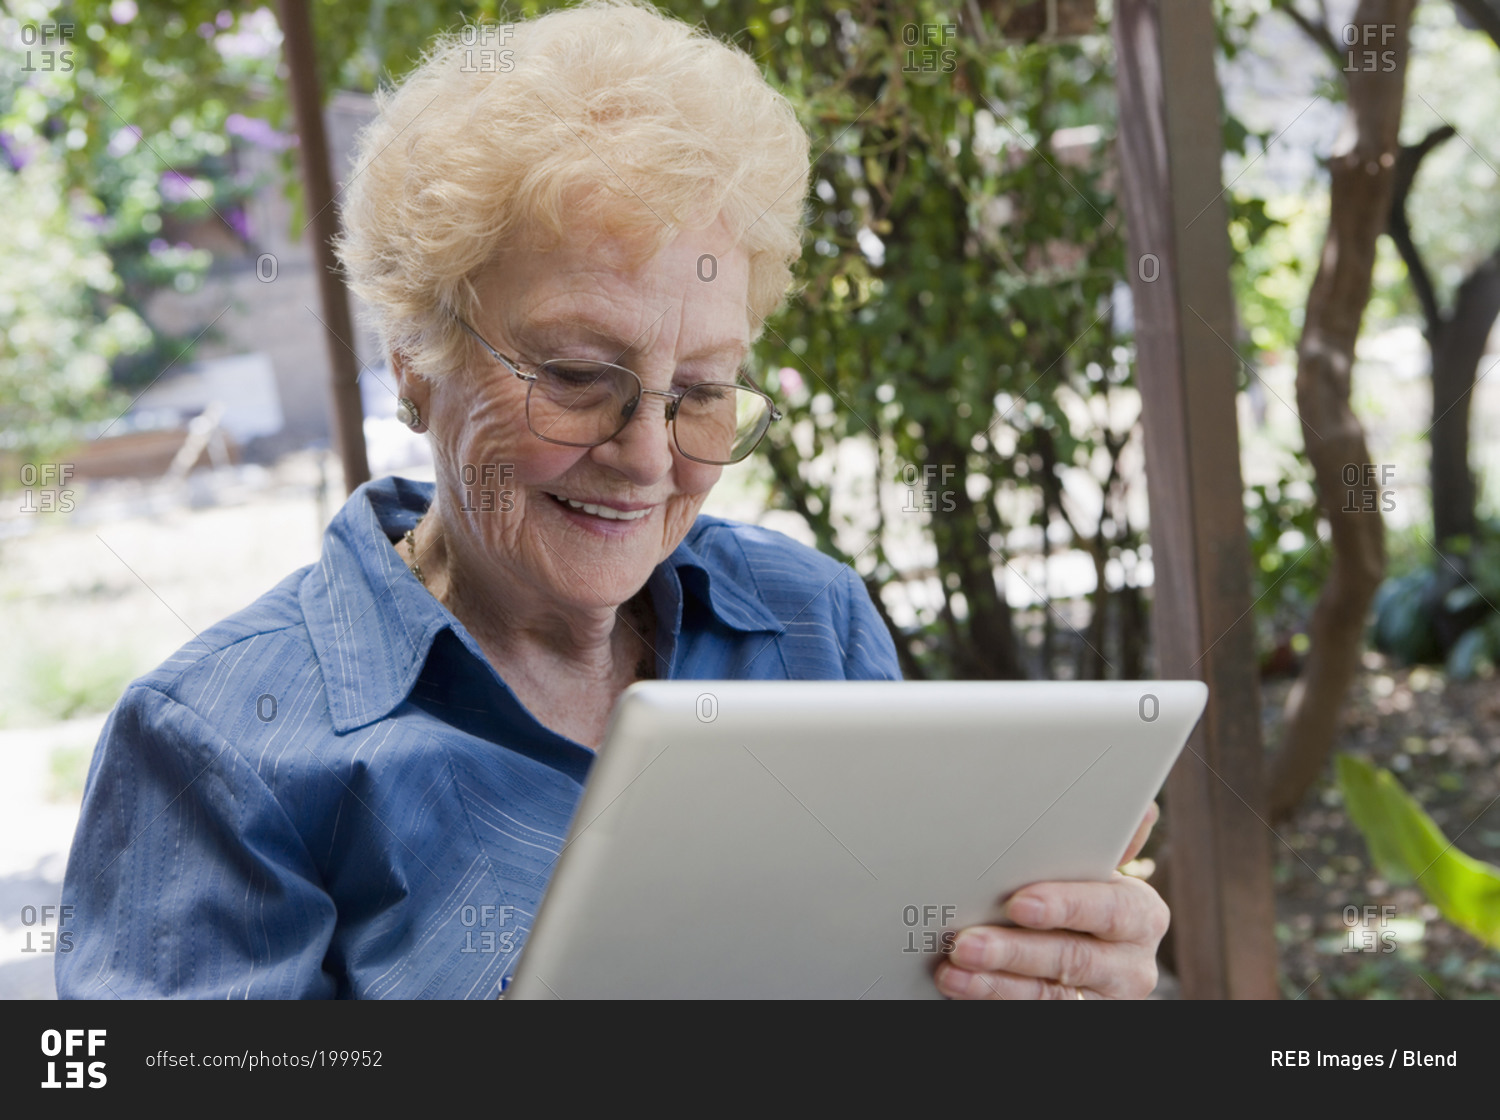 Elderly woman using tablet computer outdoors